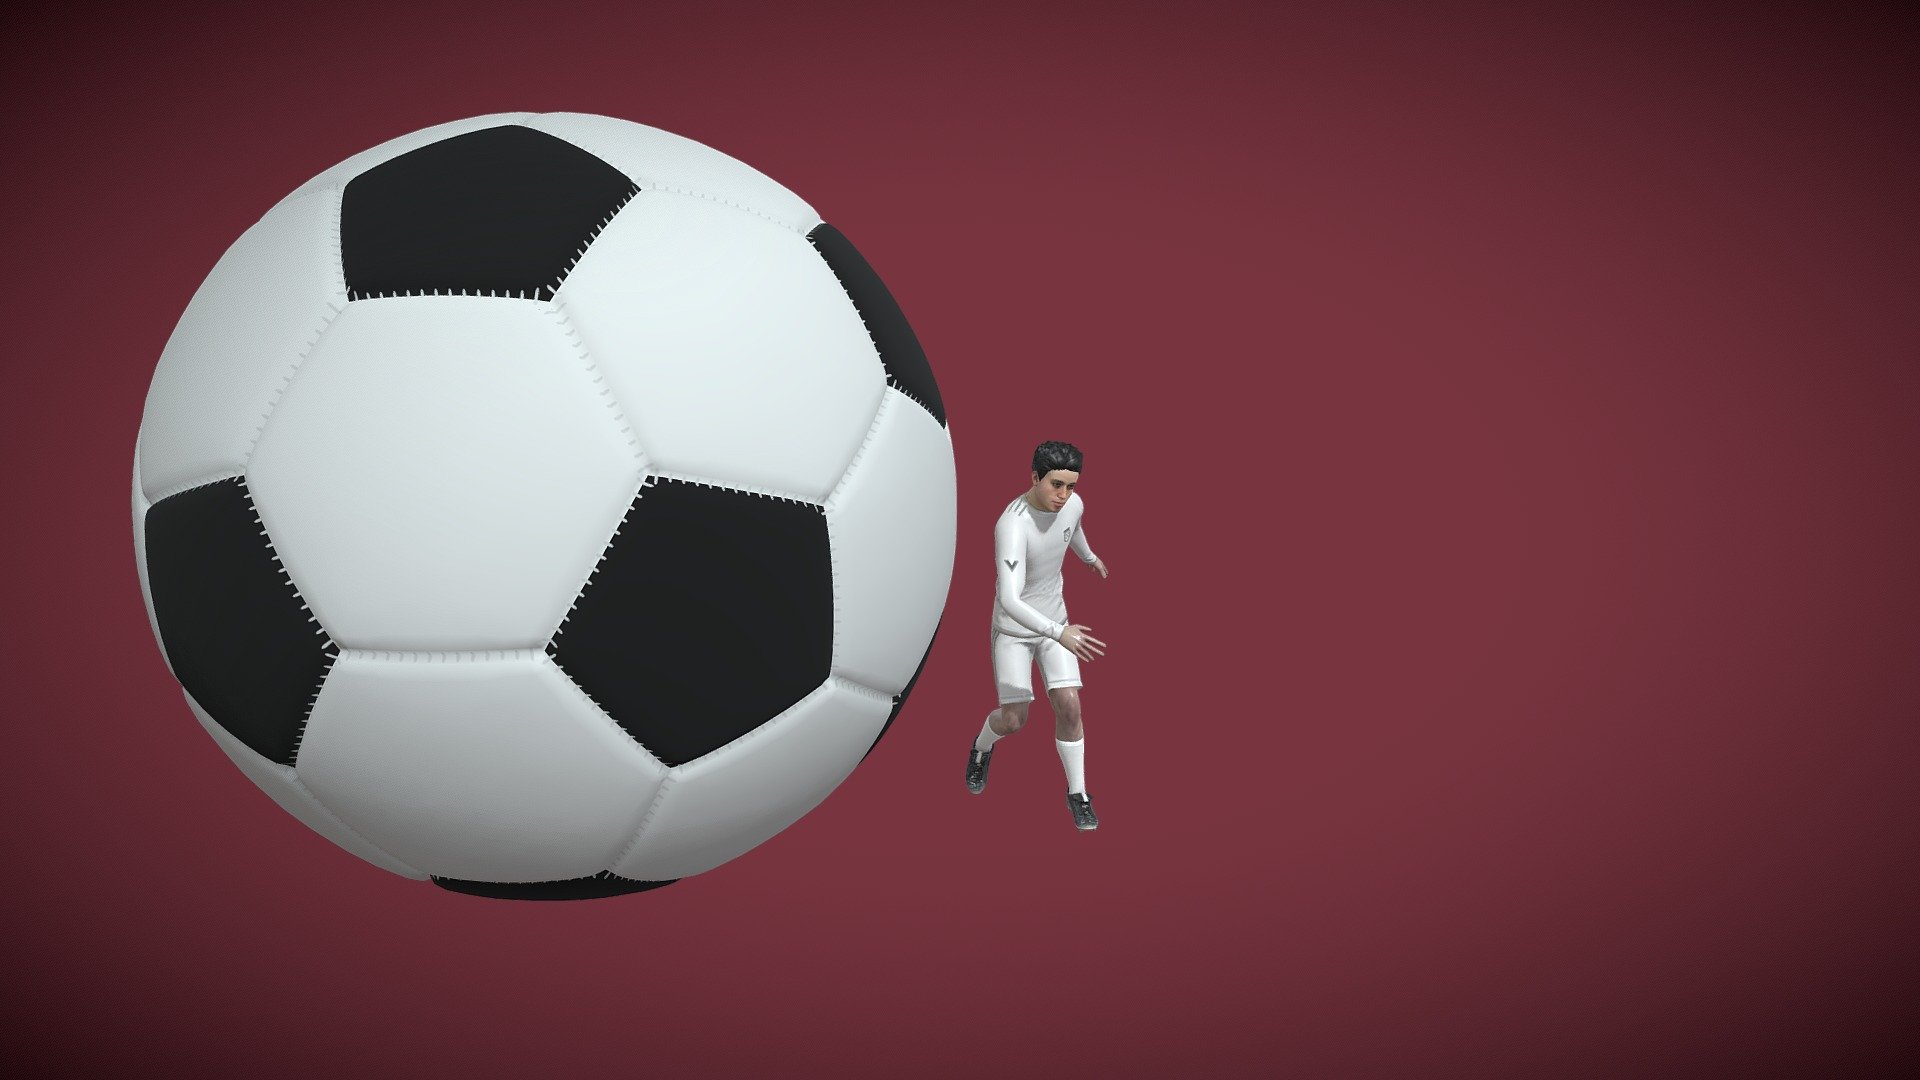 A goal keeper drop-kicks a soccer (football) ball in this 3 second animation at 30 frames per second.

See this 3D model in action, and more models like it, here in this collection of free augmeneted reality apps:

https://morpheusar.com/ - Animated Goalkeeper Drop Kicks Soccer Ball - 3D model by LasquetiSpice 3d model